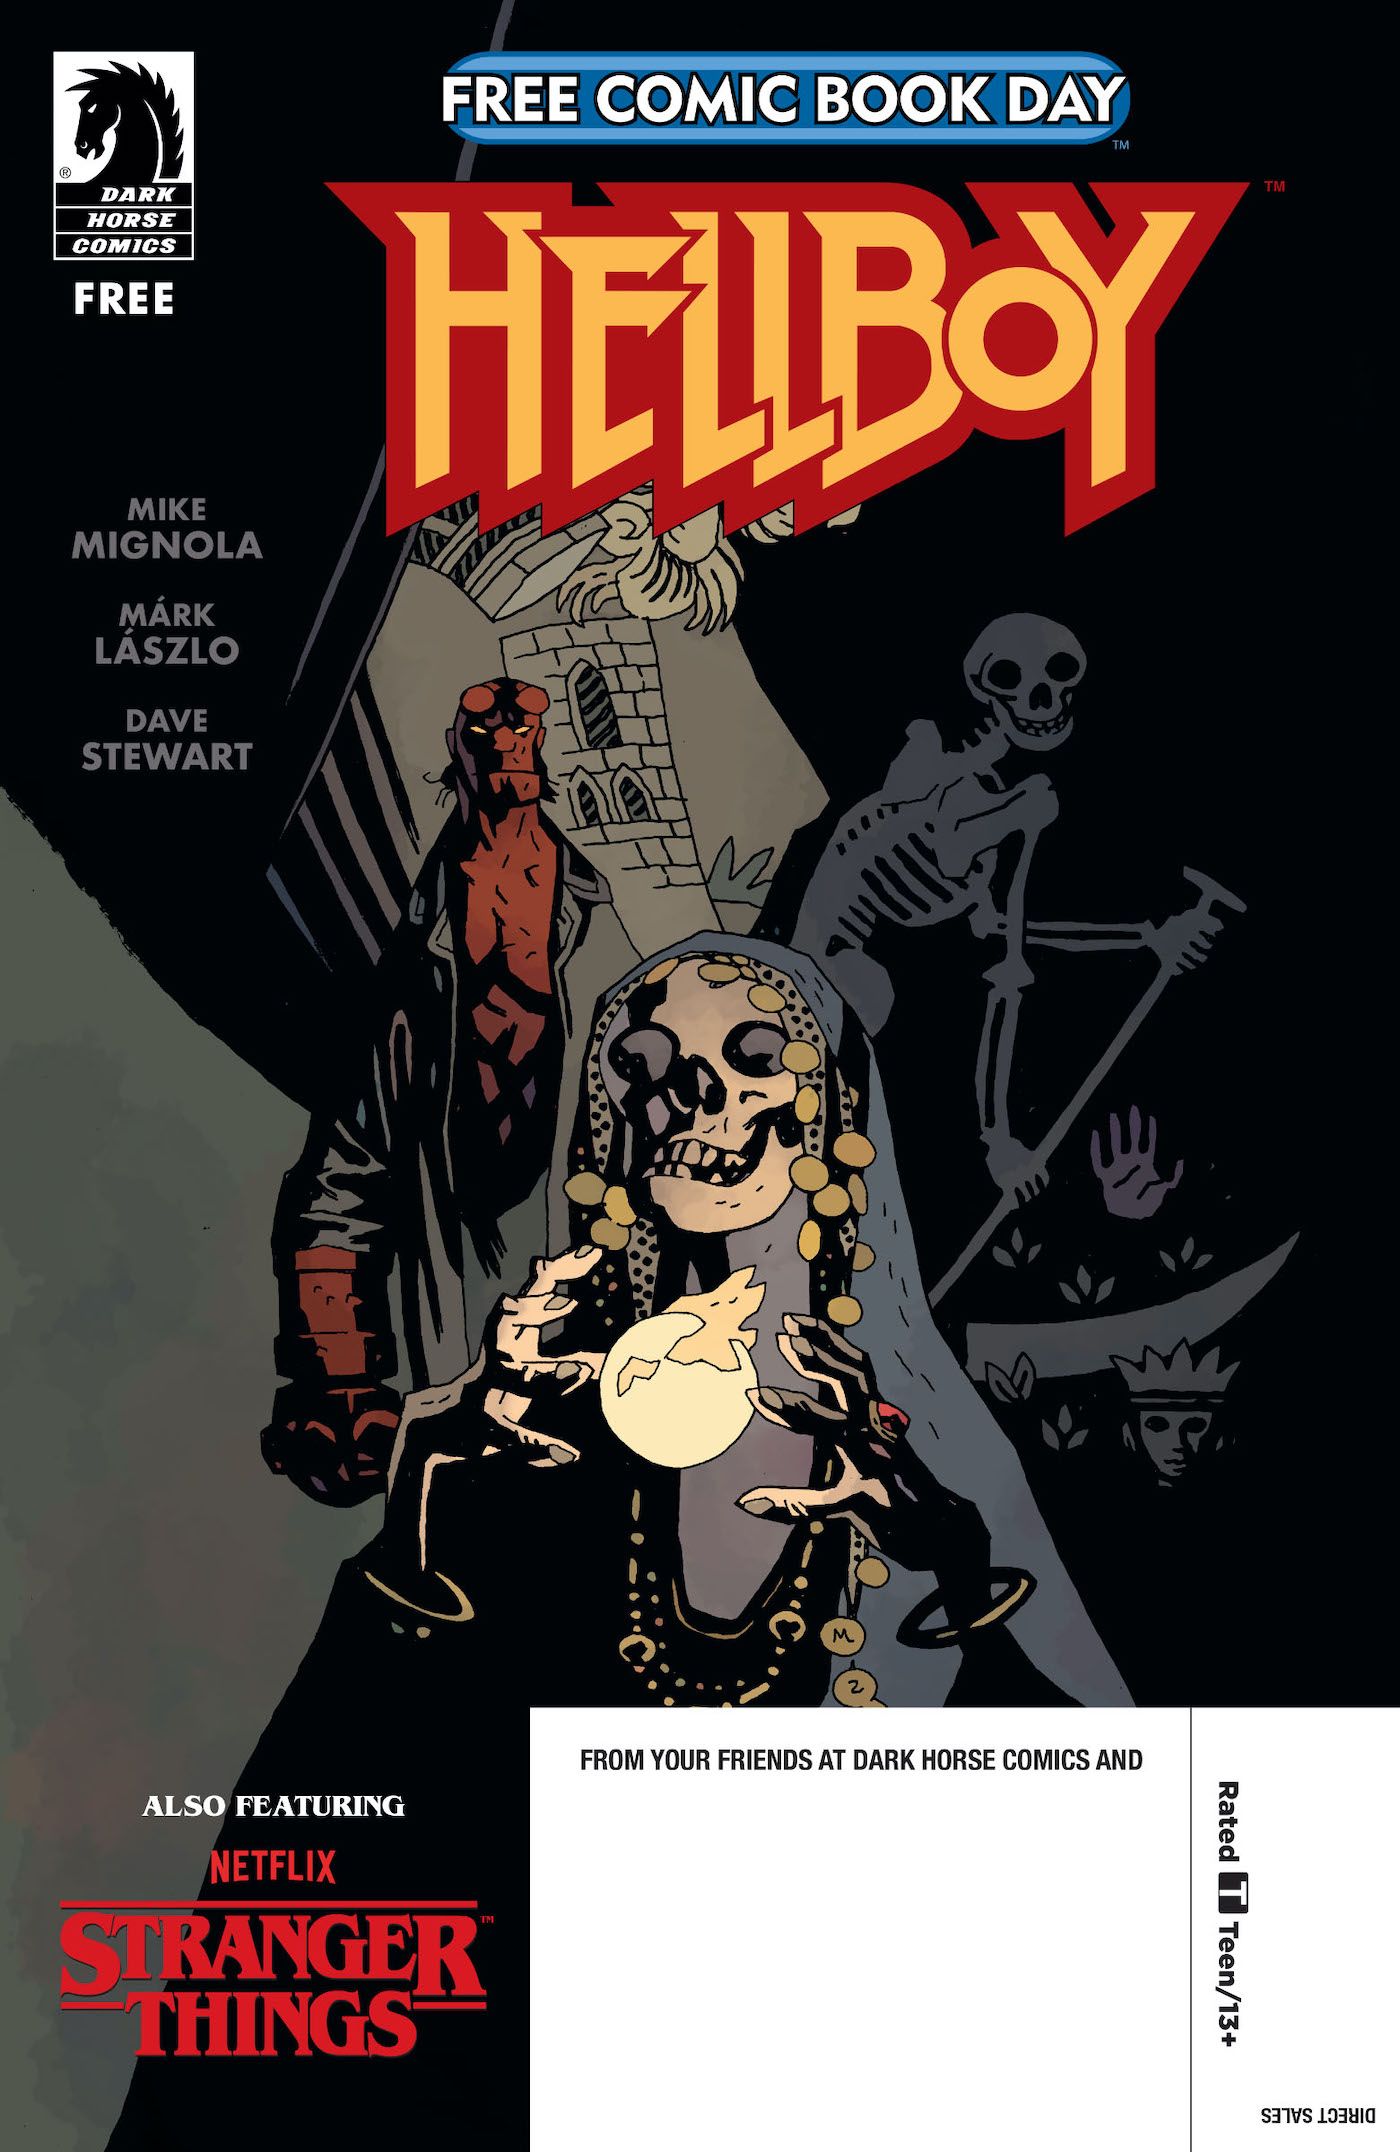 “A Story Aimed At New Hellboy Readers”: Mike Mignola Teases Free Comic Book Day Special (Exclusive)